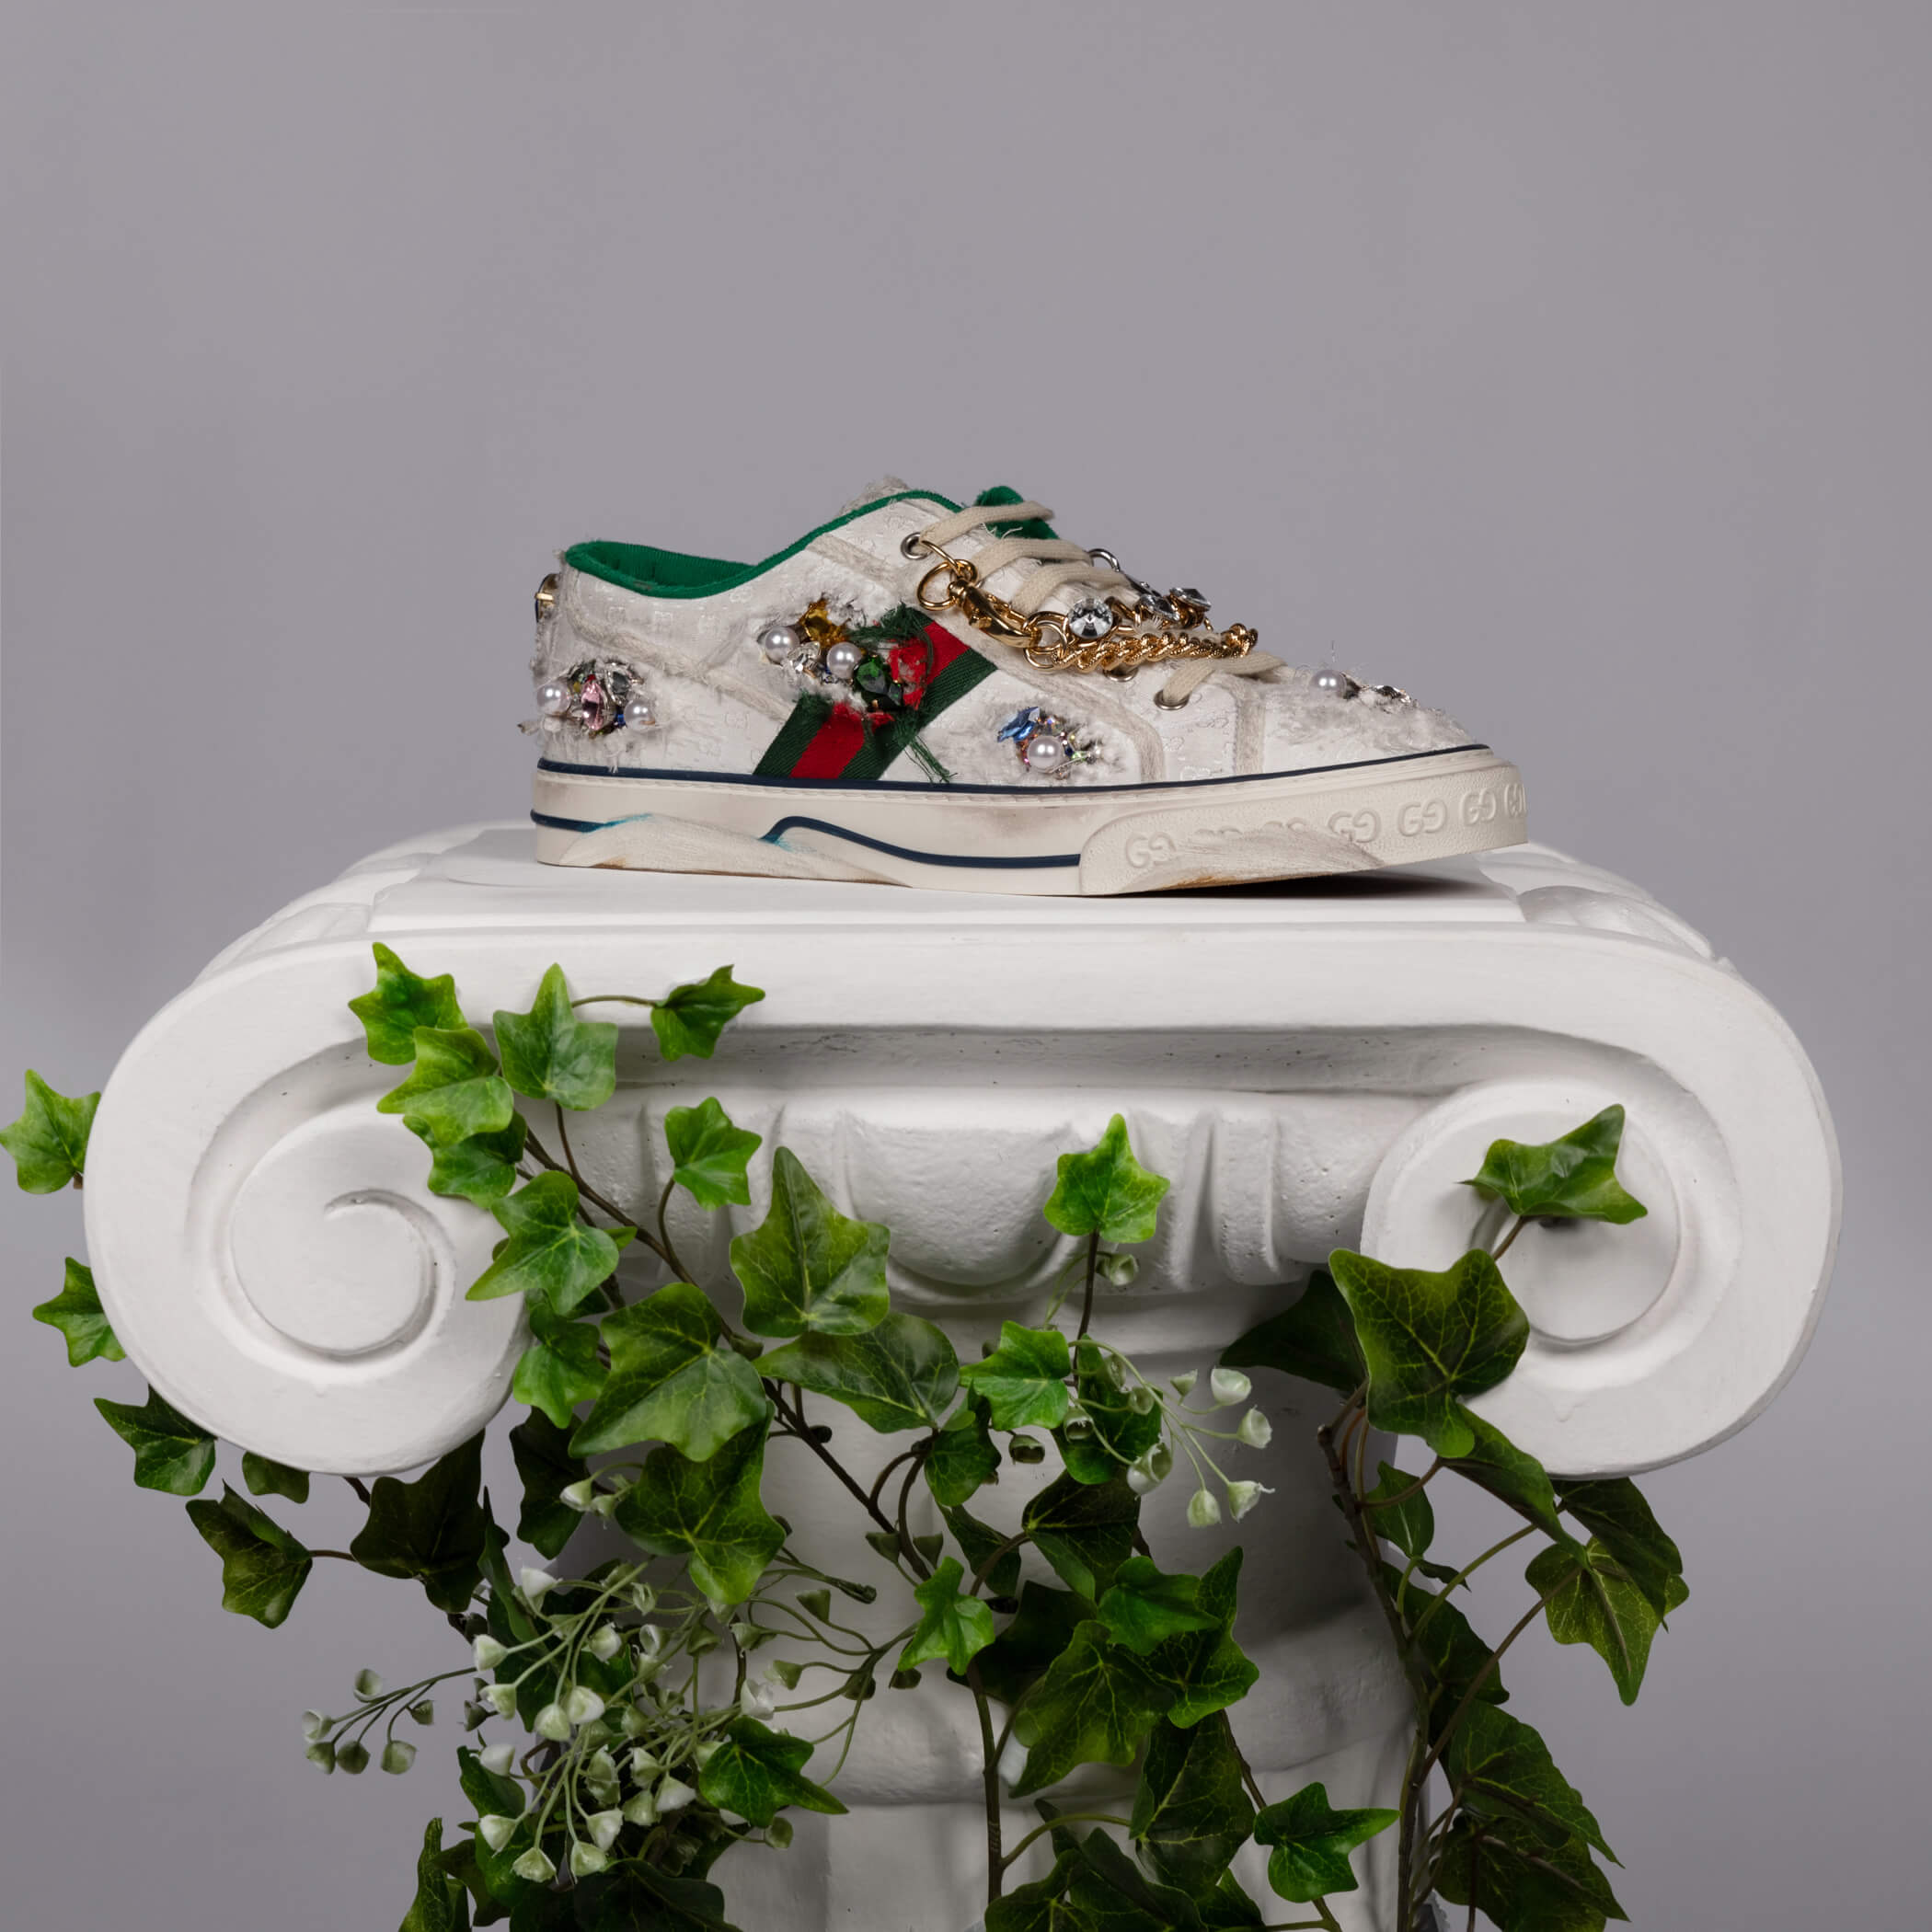 STILL_LIFE_ART_1.jpg image from GUCCI SNEAKER GARAGE RAL7000STUDIO project created on 2020-03-01